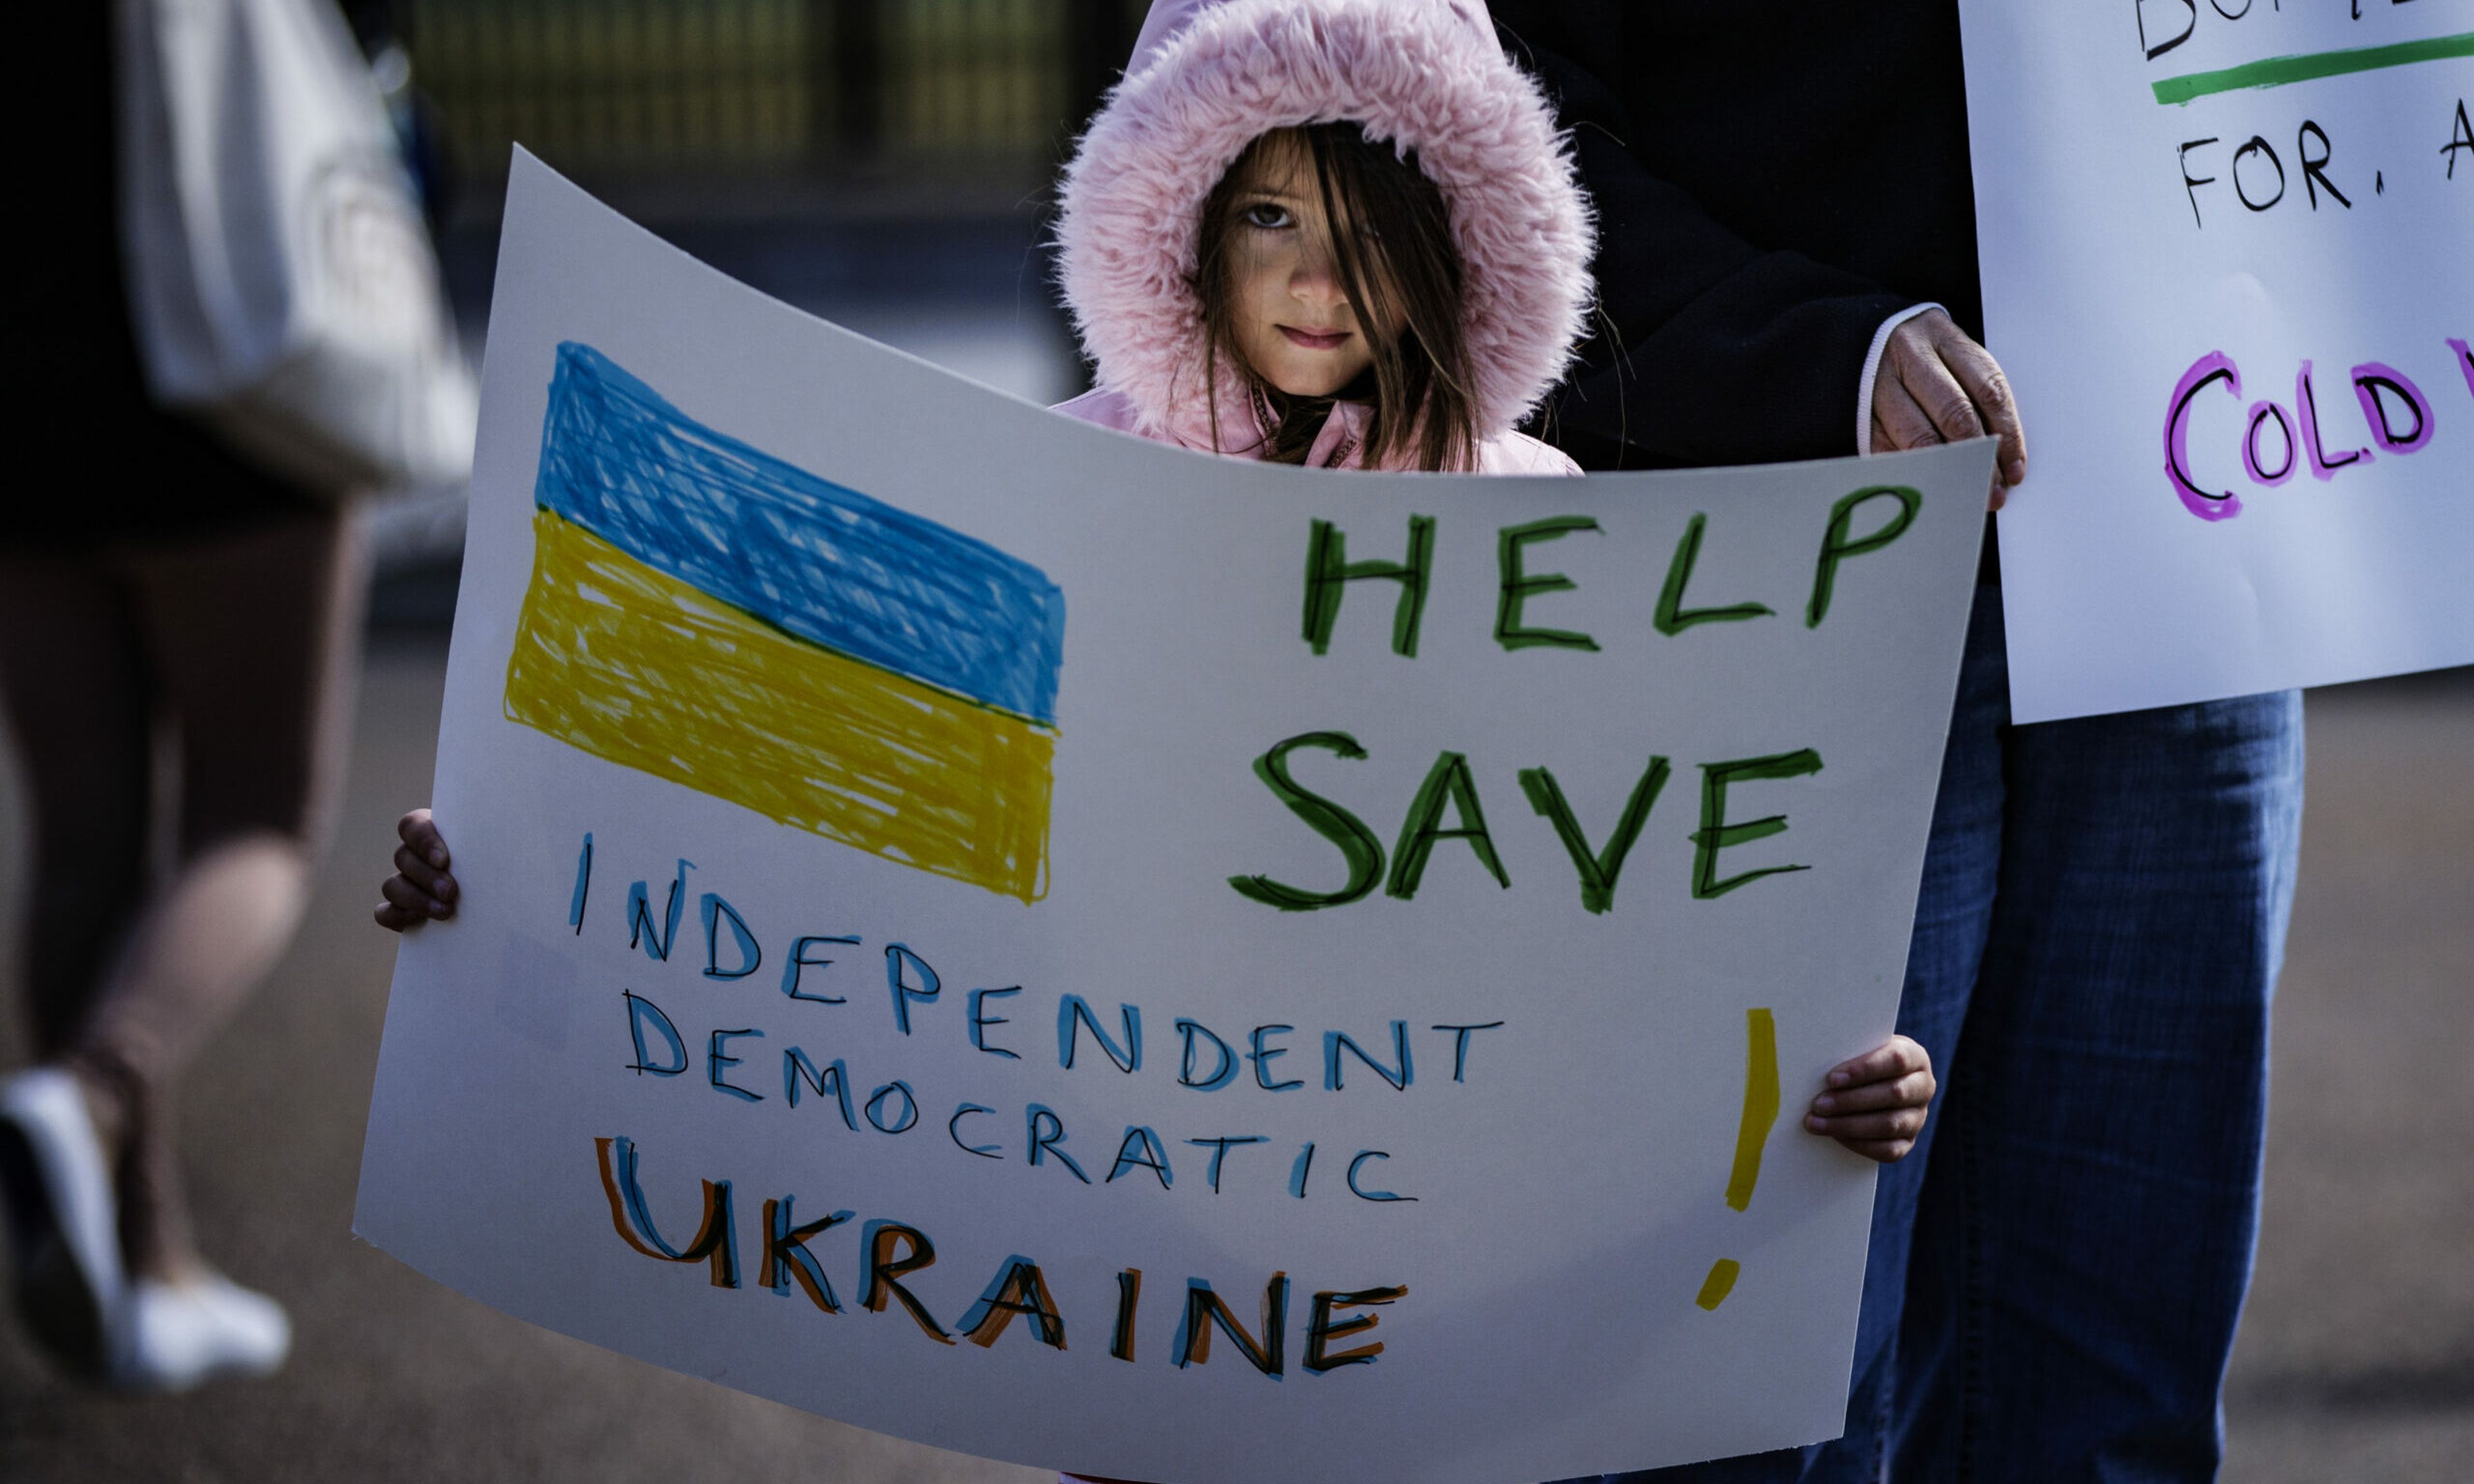 Pro-Ukrainian demonstrators gather outside of the White House to protest the Russian invasion on Feb. 25, 2022, in Washington. Russian President Vladimir Putin launched a full-scale invasion of Ukraine on Feb. 24. (Photo by Samuel Corum/Getty Images)